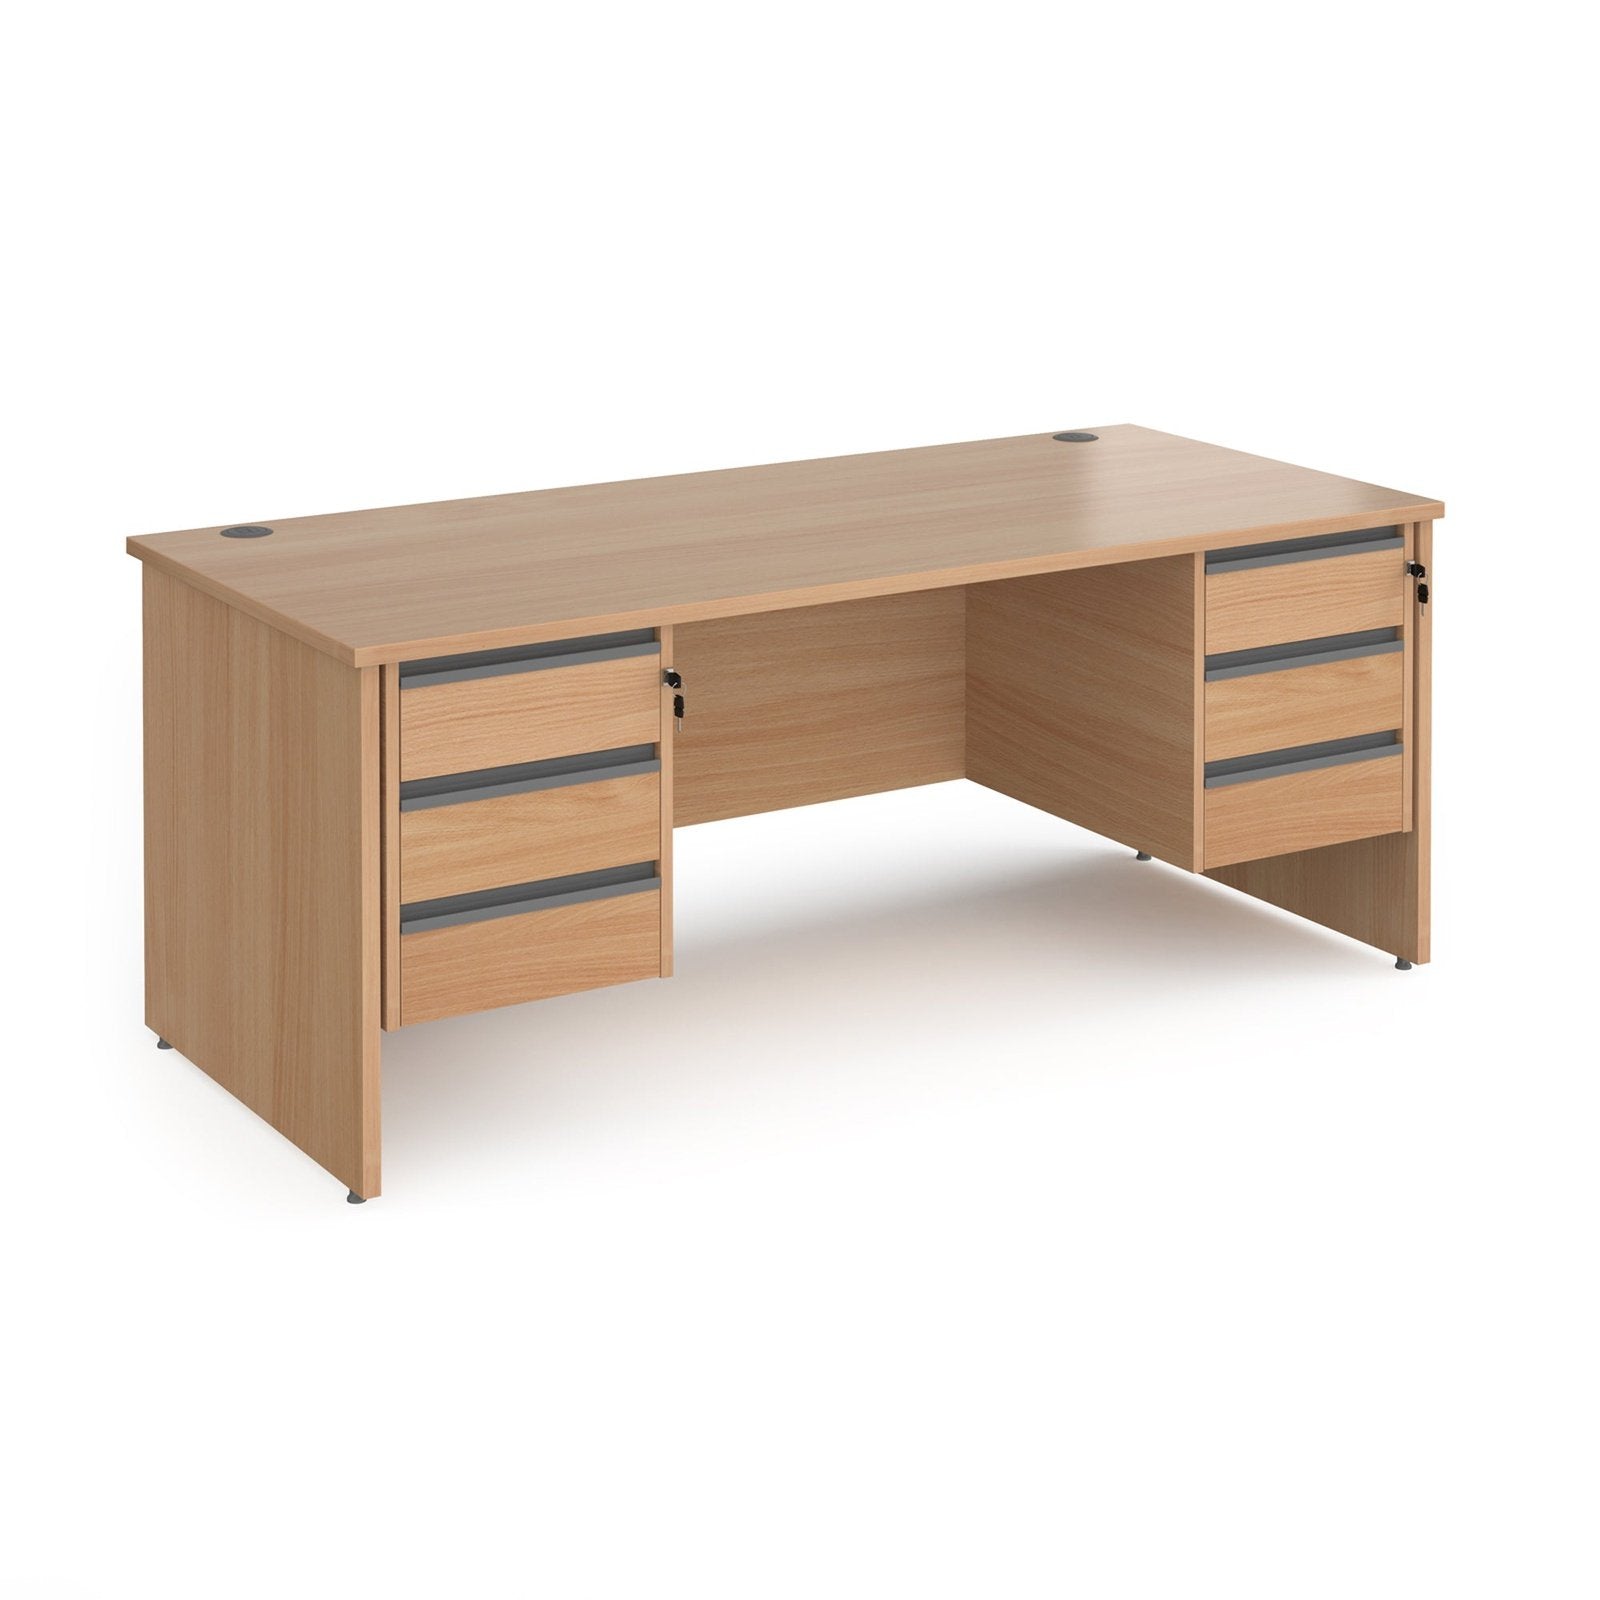 Contract 25 straight desk with 3 drawer pedestals and panel leg - Office Products Online